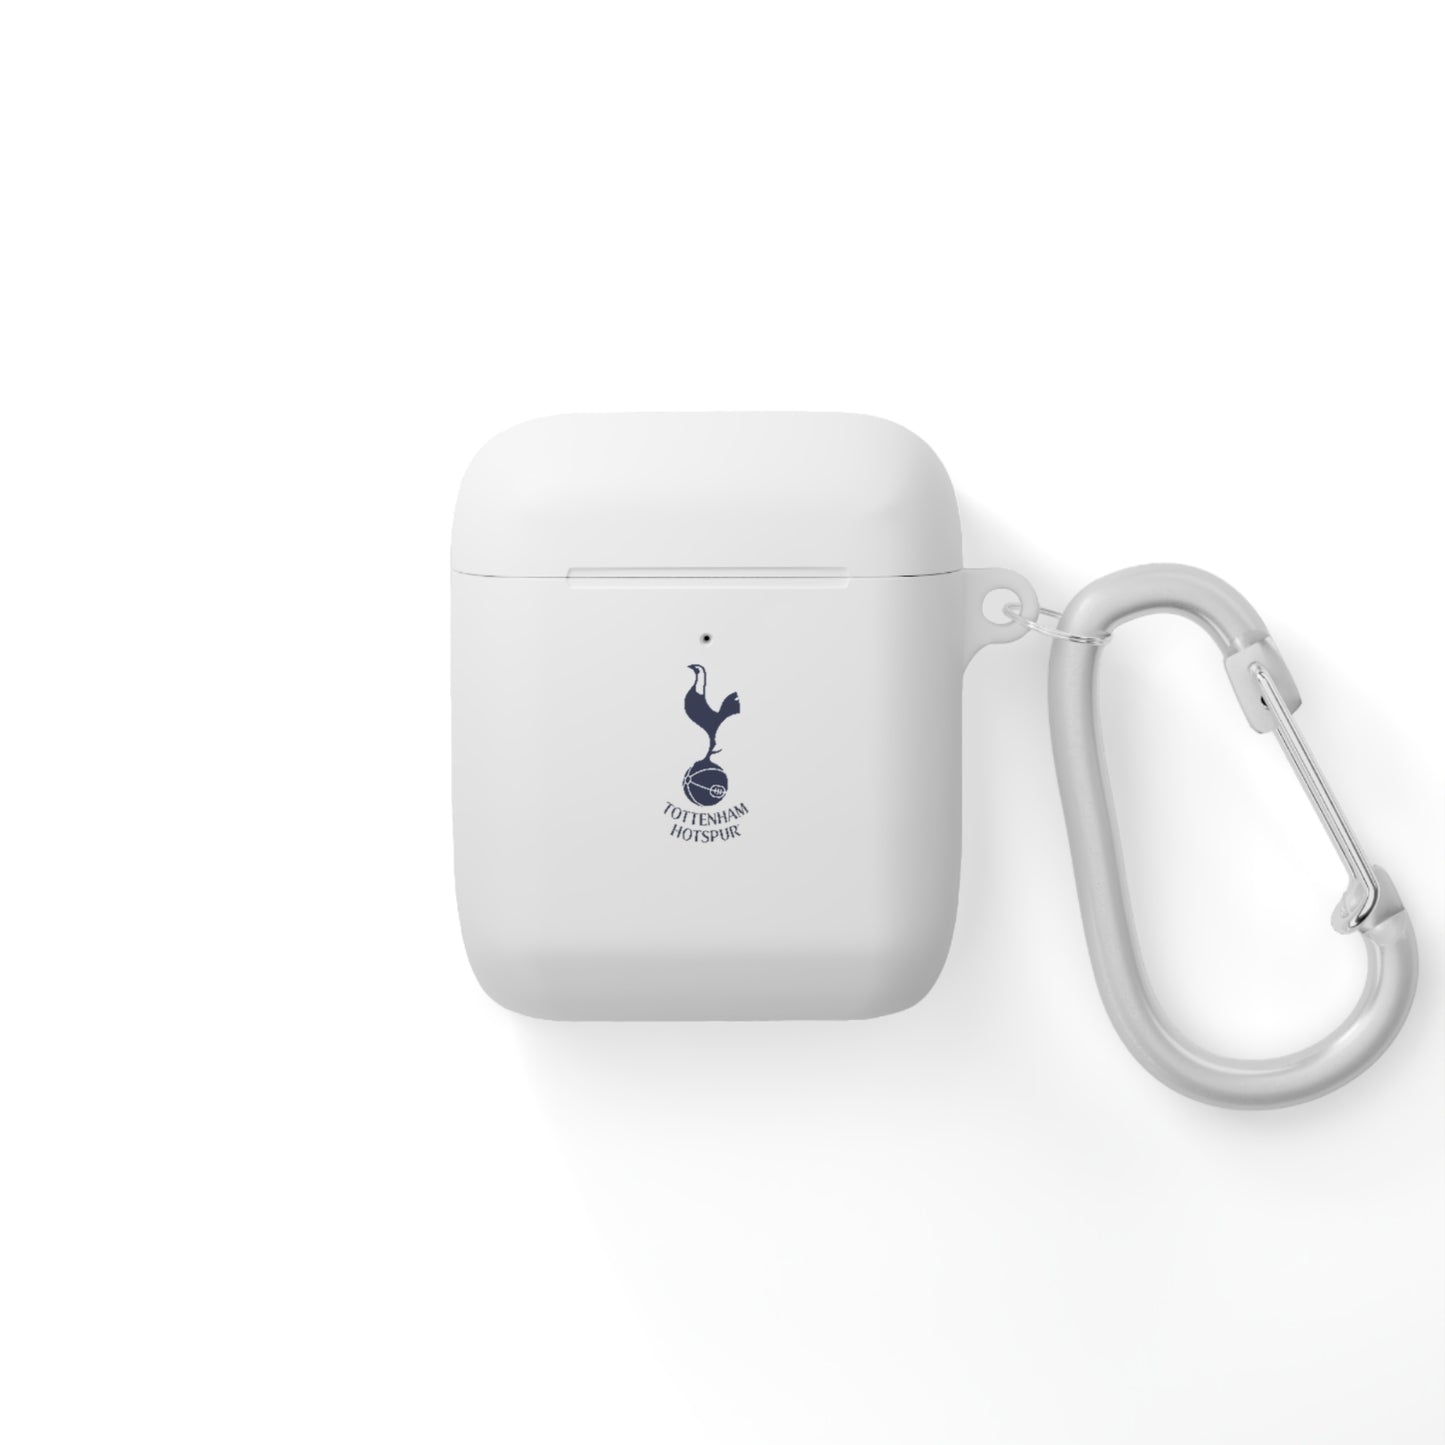 Tottenham Hotspur AirPods and AirPods Pro Case Cover